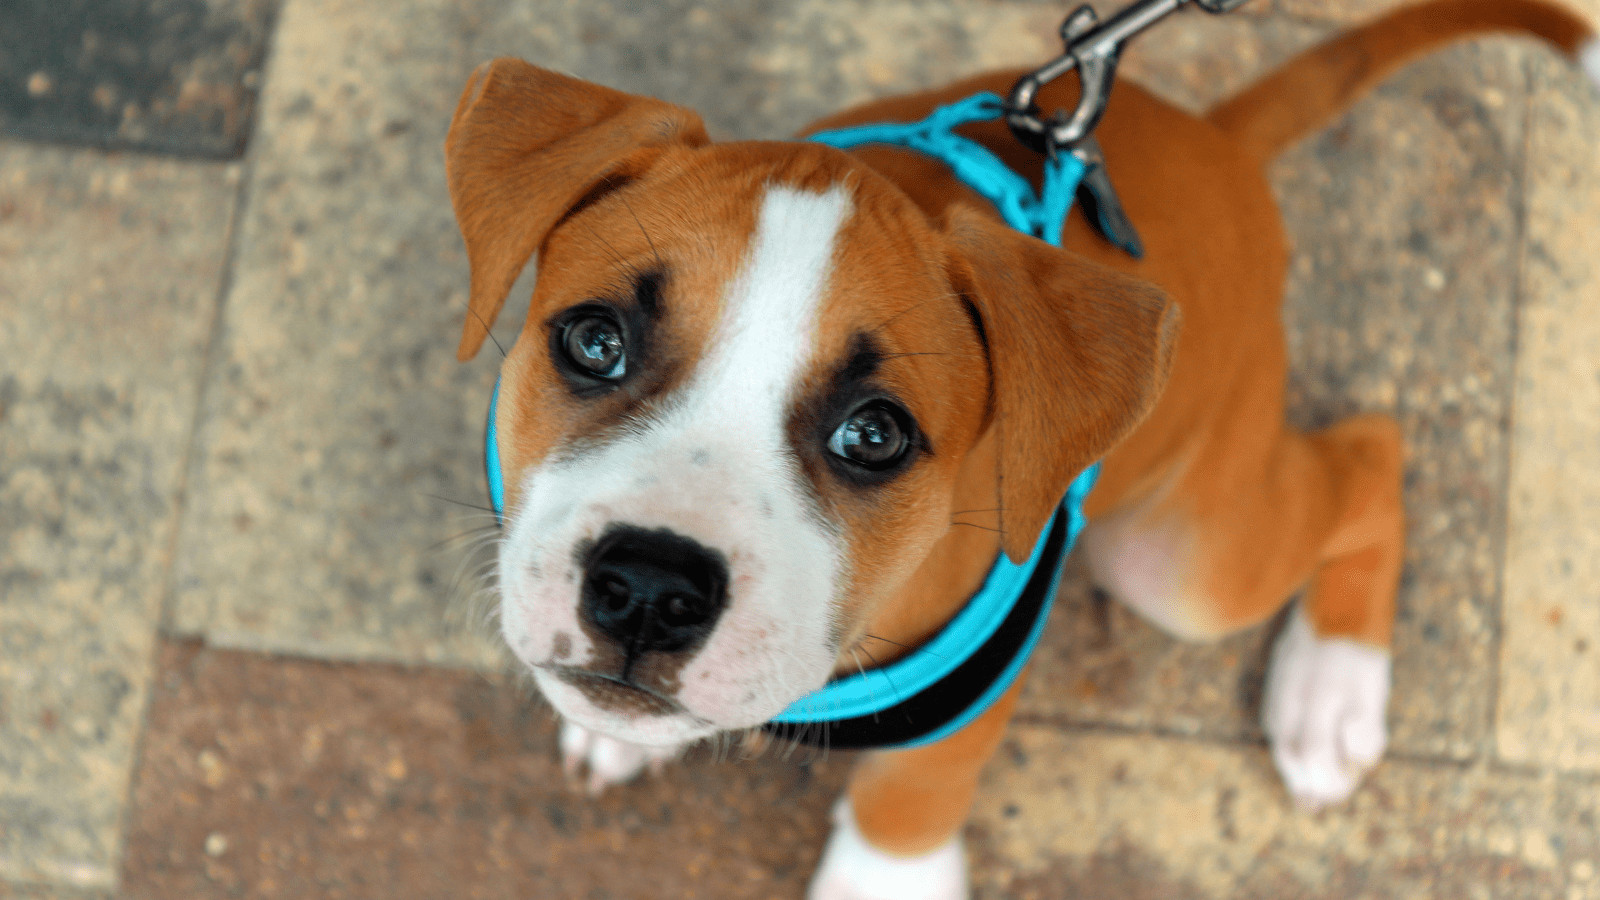 How to train a dog to wear a harness